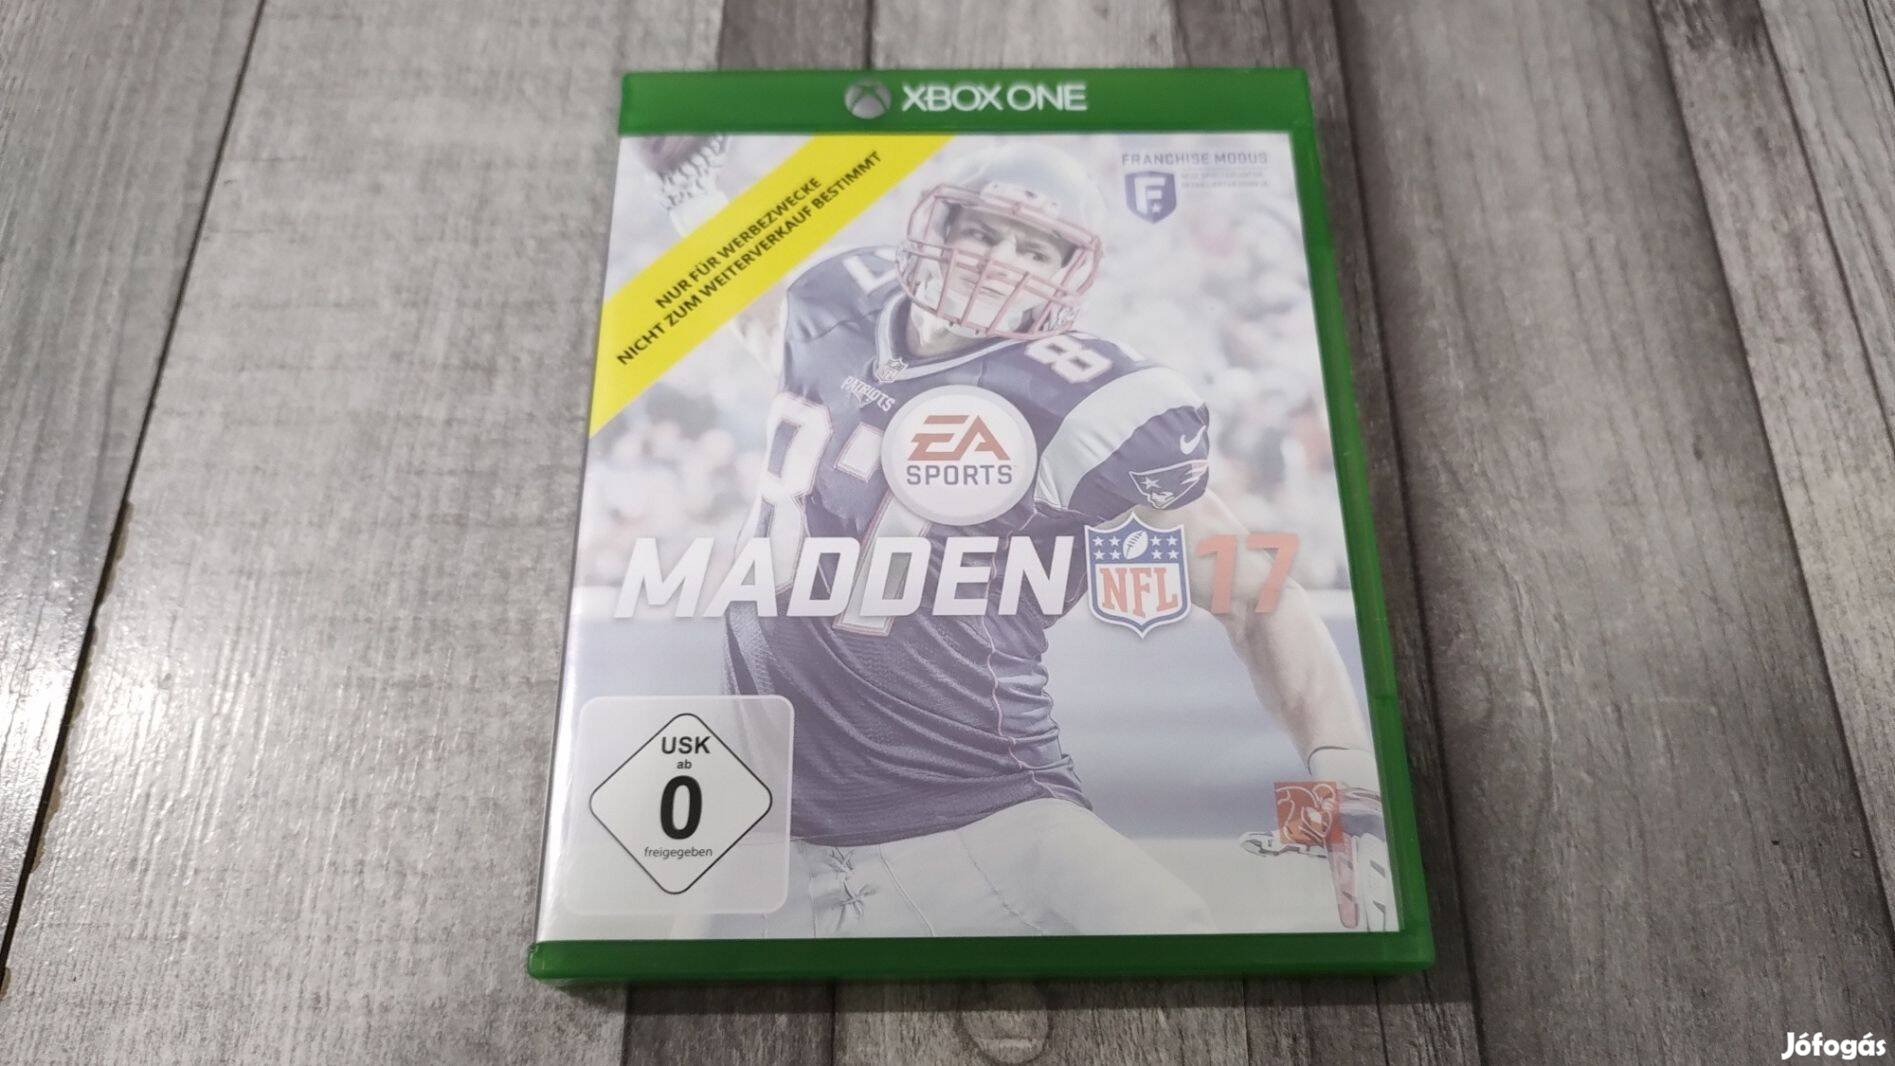 Top Xbox One(S/X)-Series X : Madden NFL 17